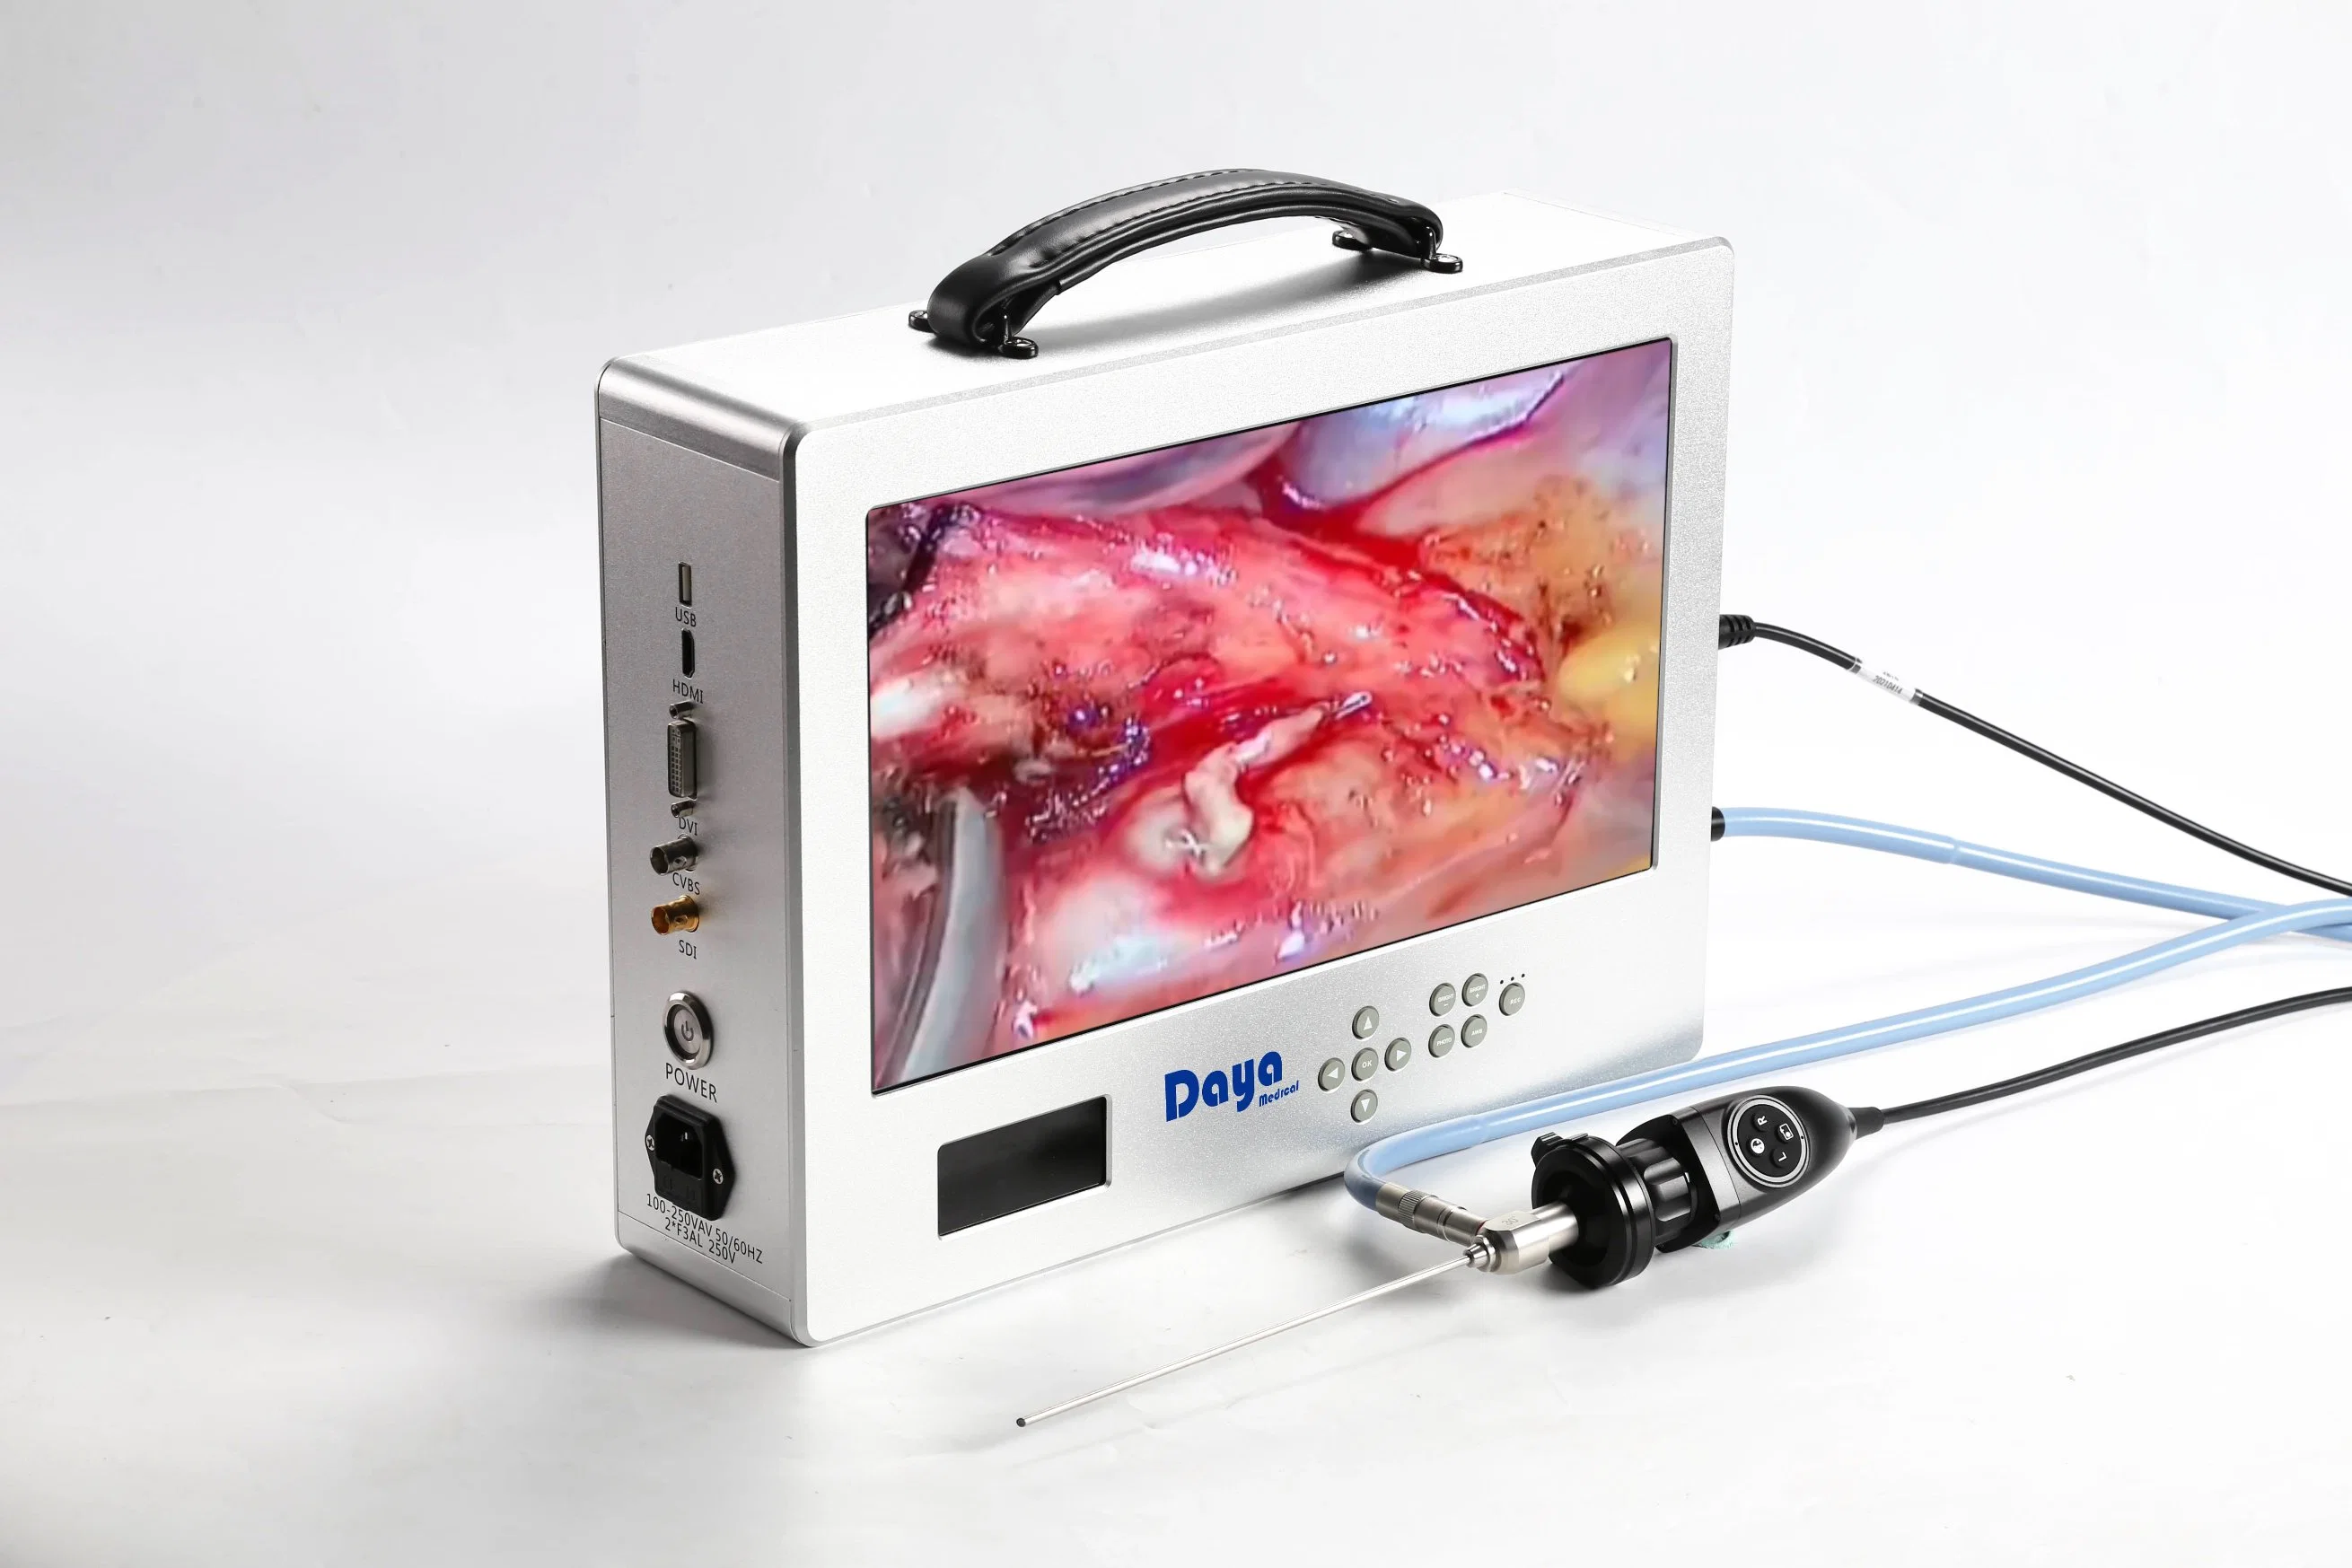 High Quality Ent Surgery Camera Inspection Camera Endoscope System Medical Monitor for Endoscopy